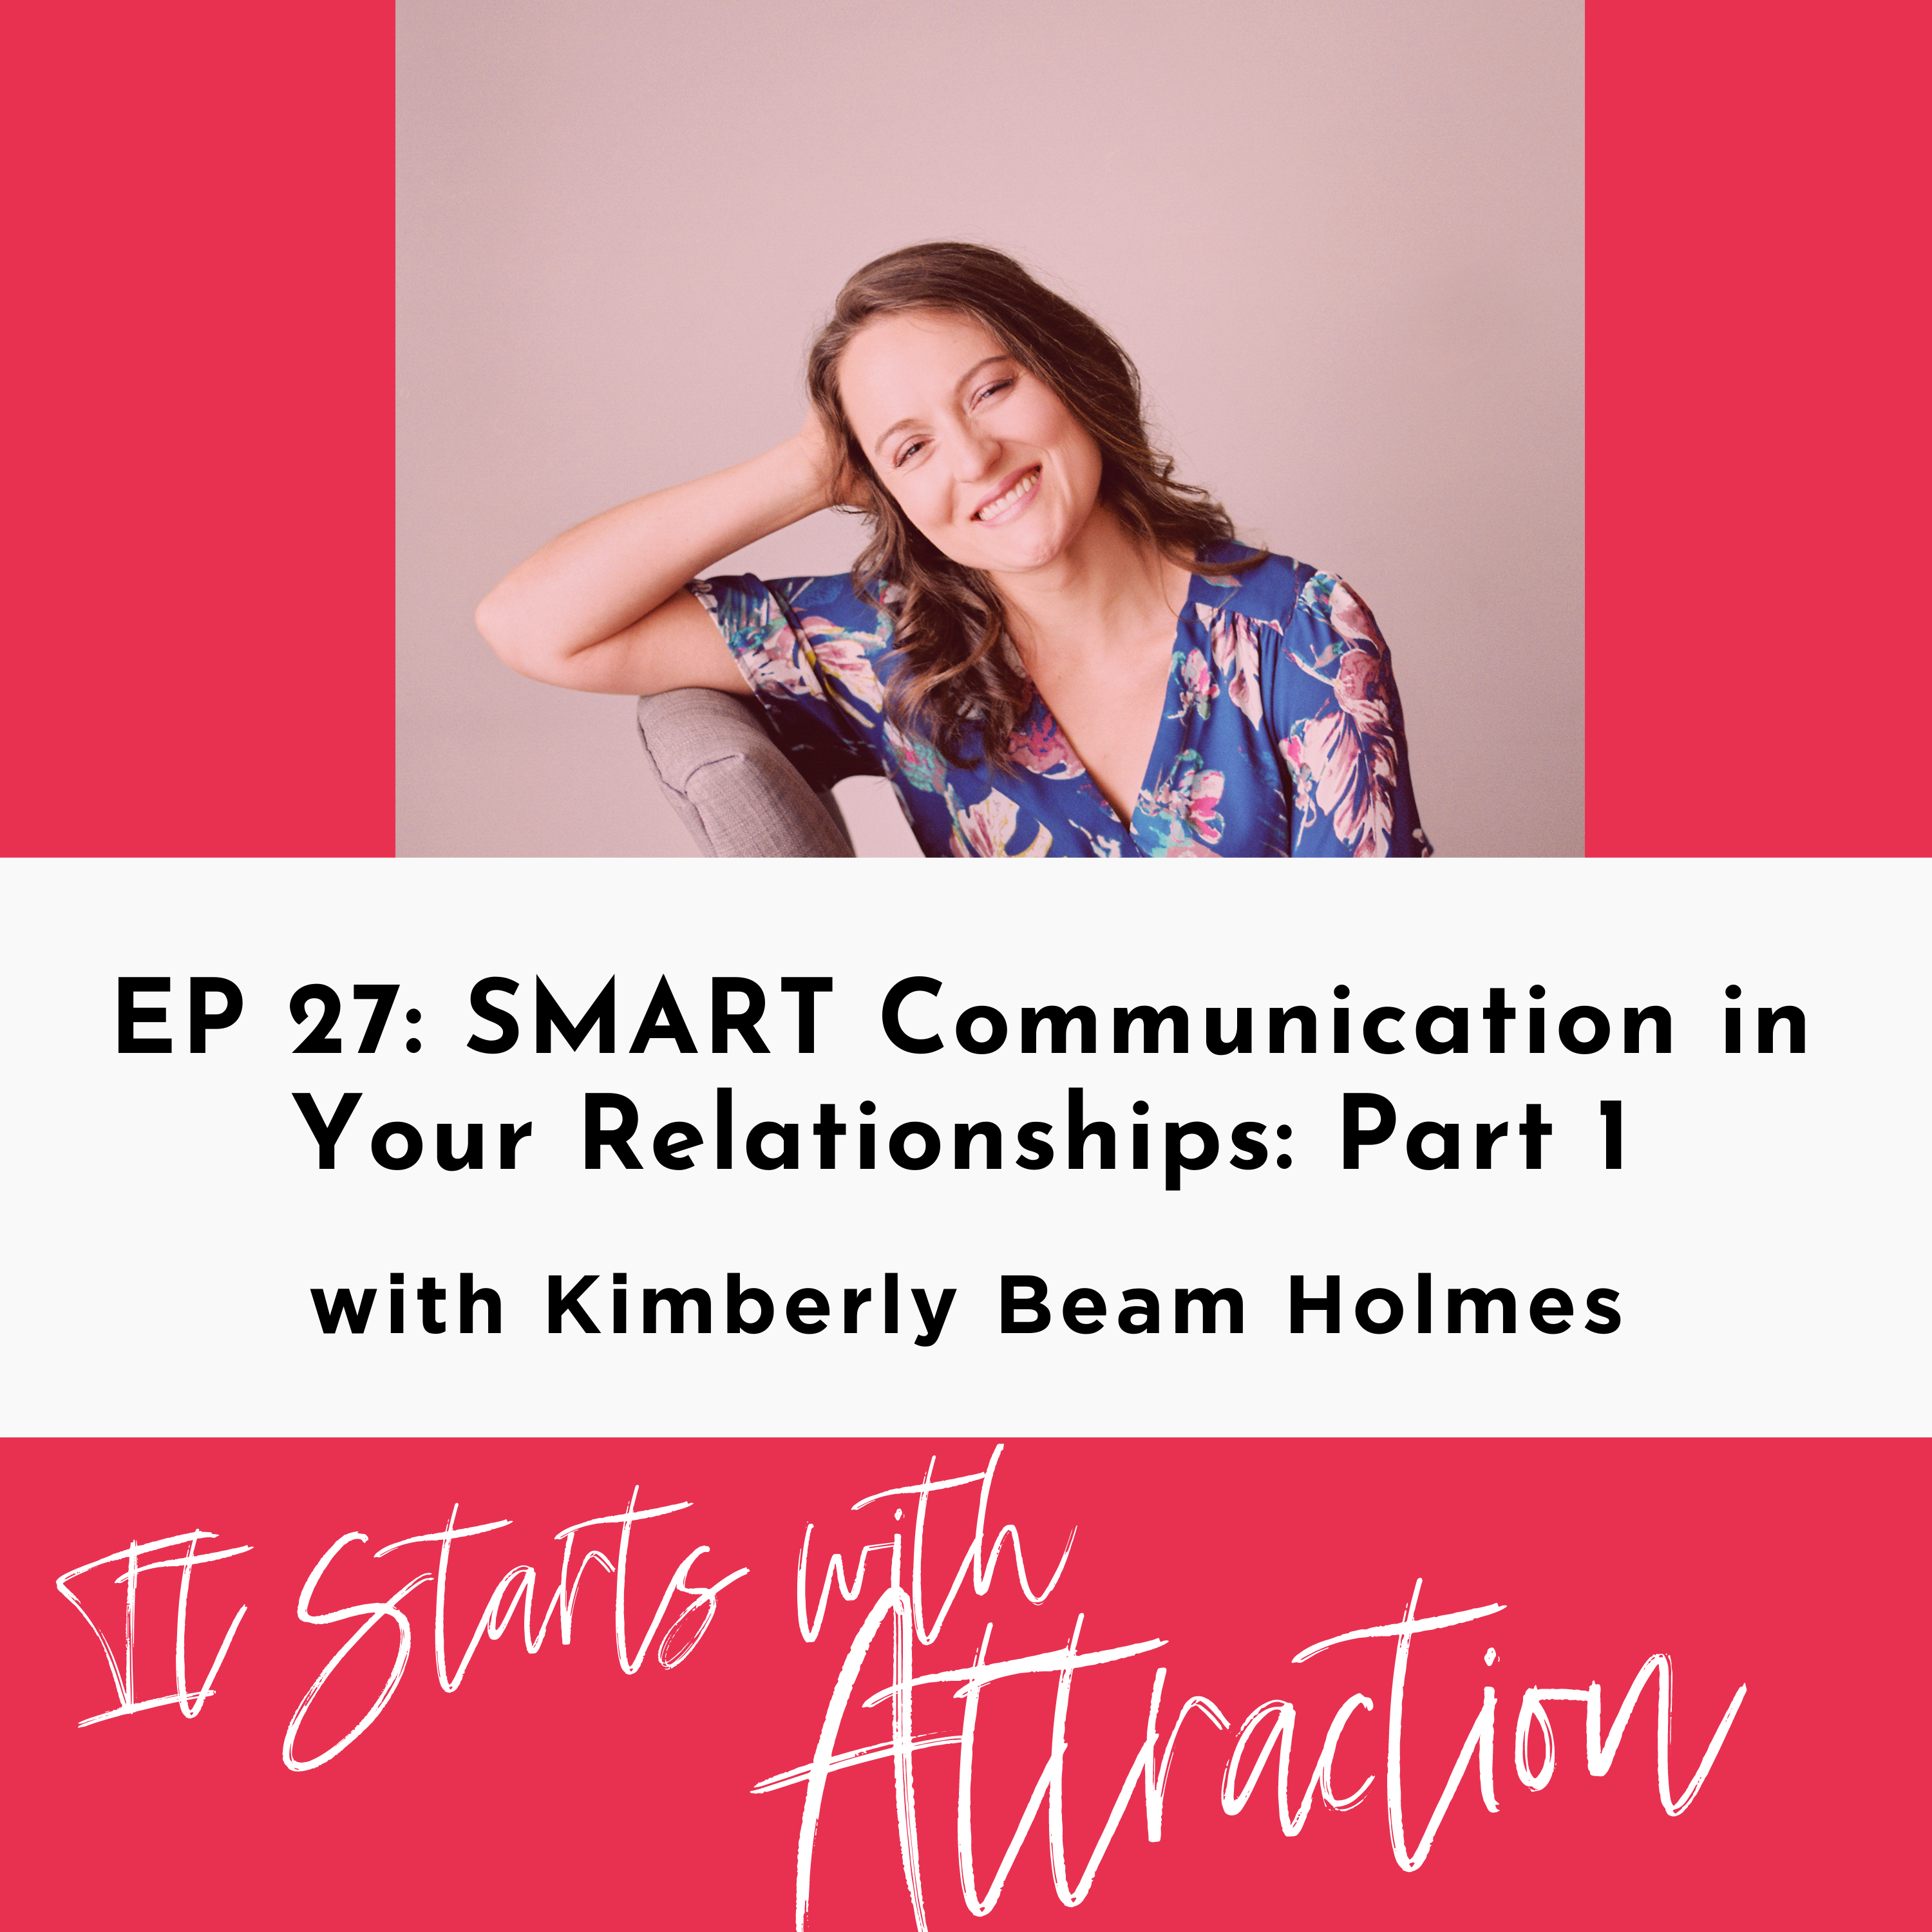 SMART Communication in Your Relationships Part 1